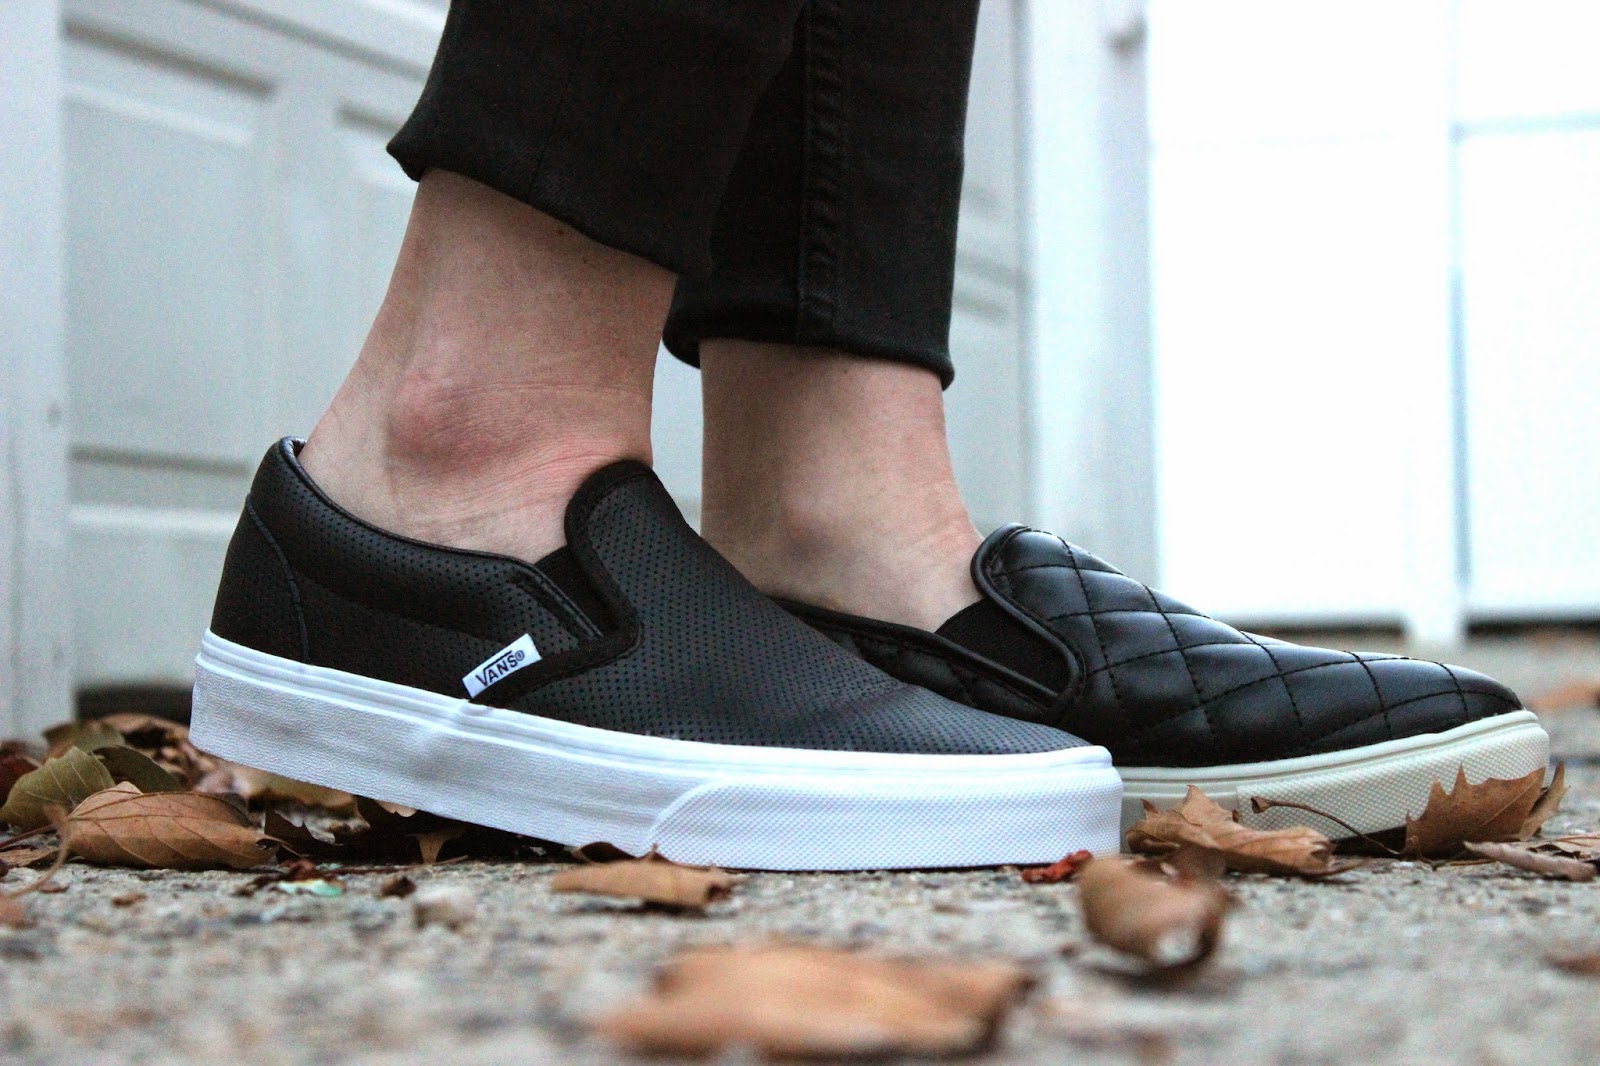 vans slip ons perforated leather